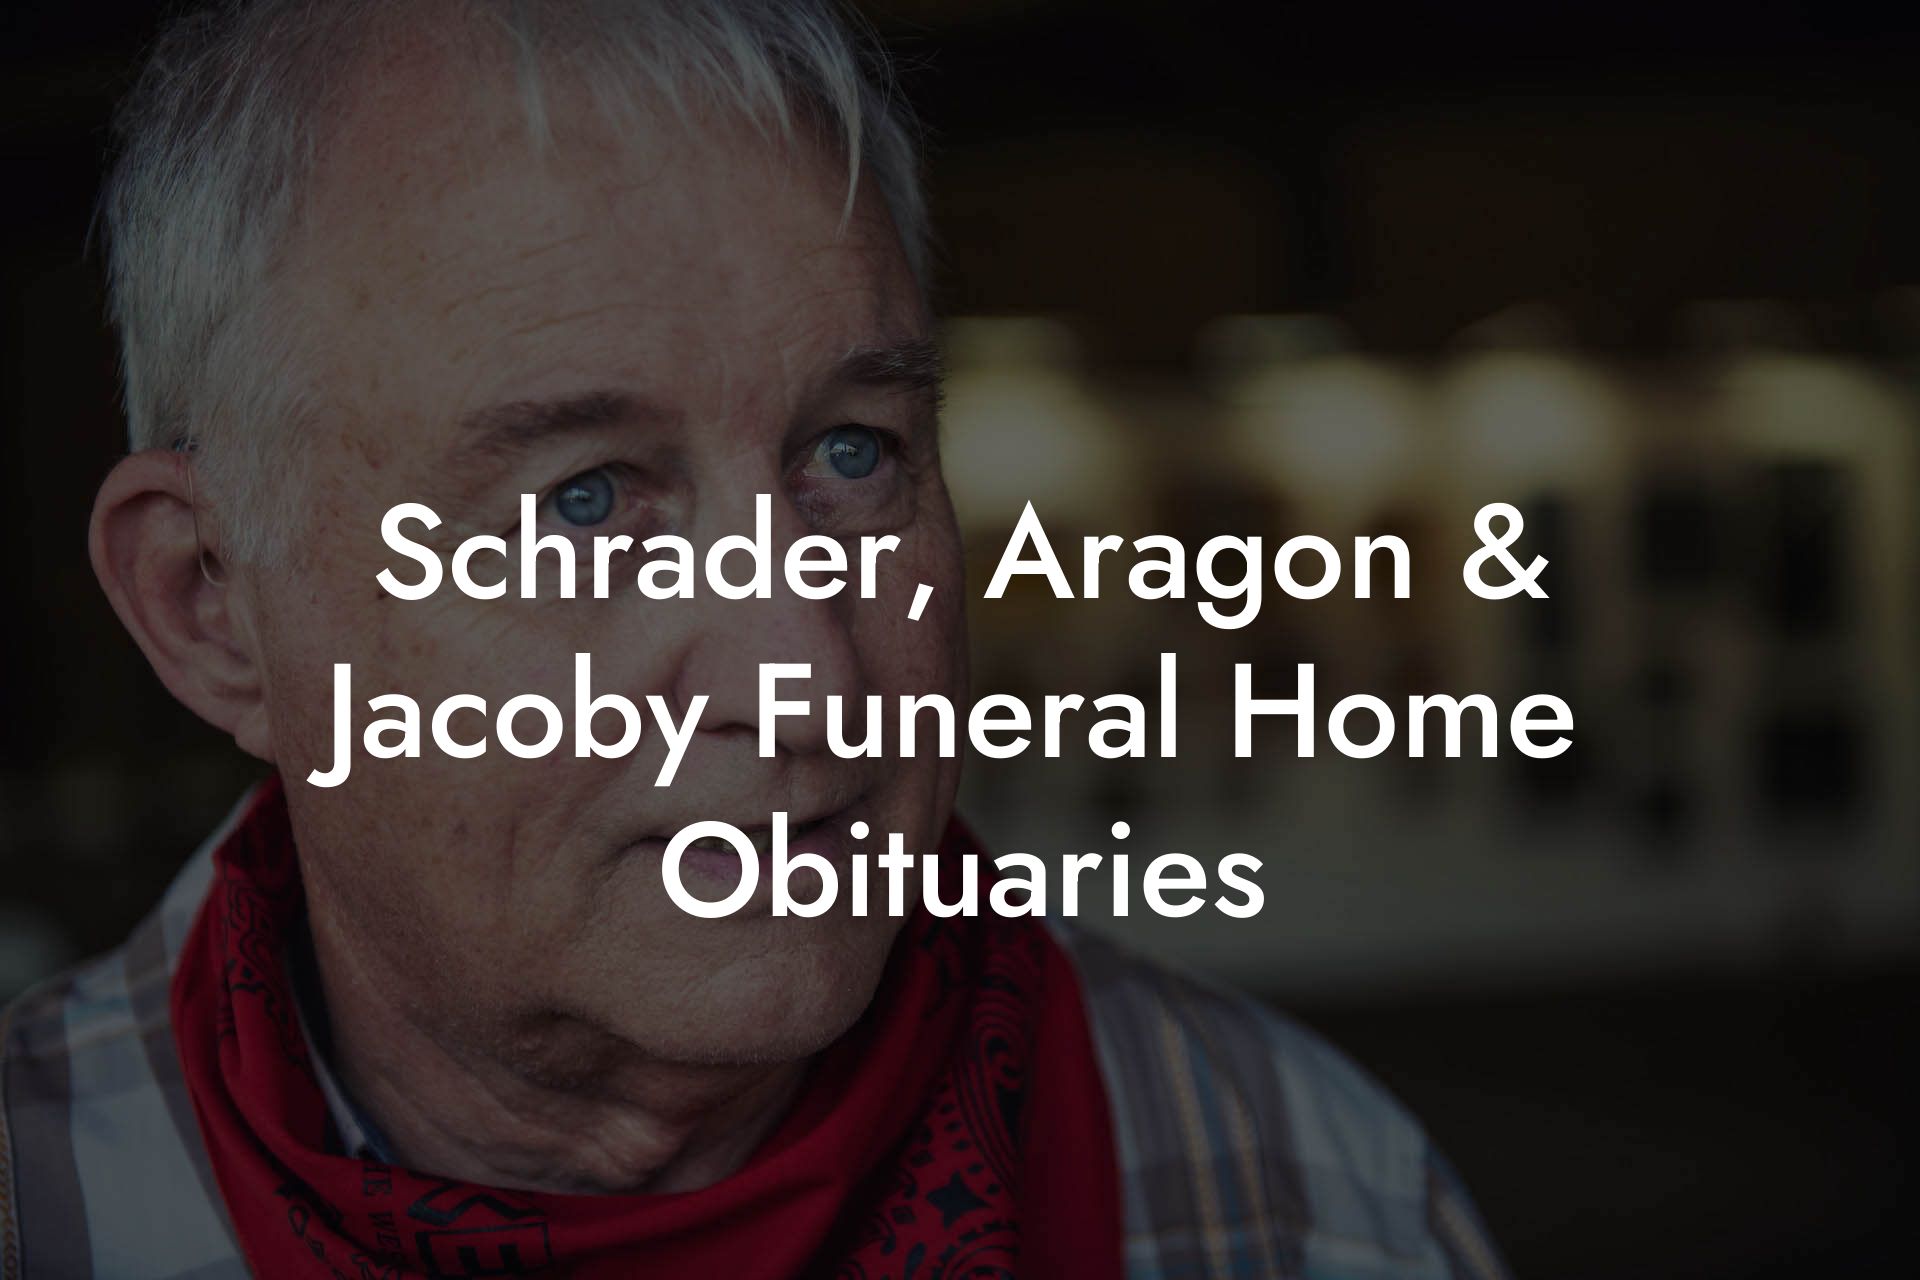 Schrader, Aragon & Jacoby Funeral Home Obituaries